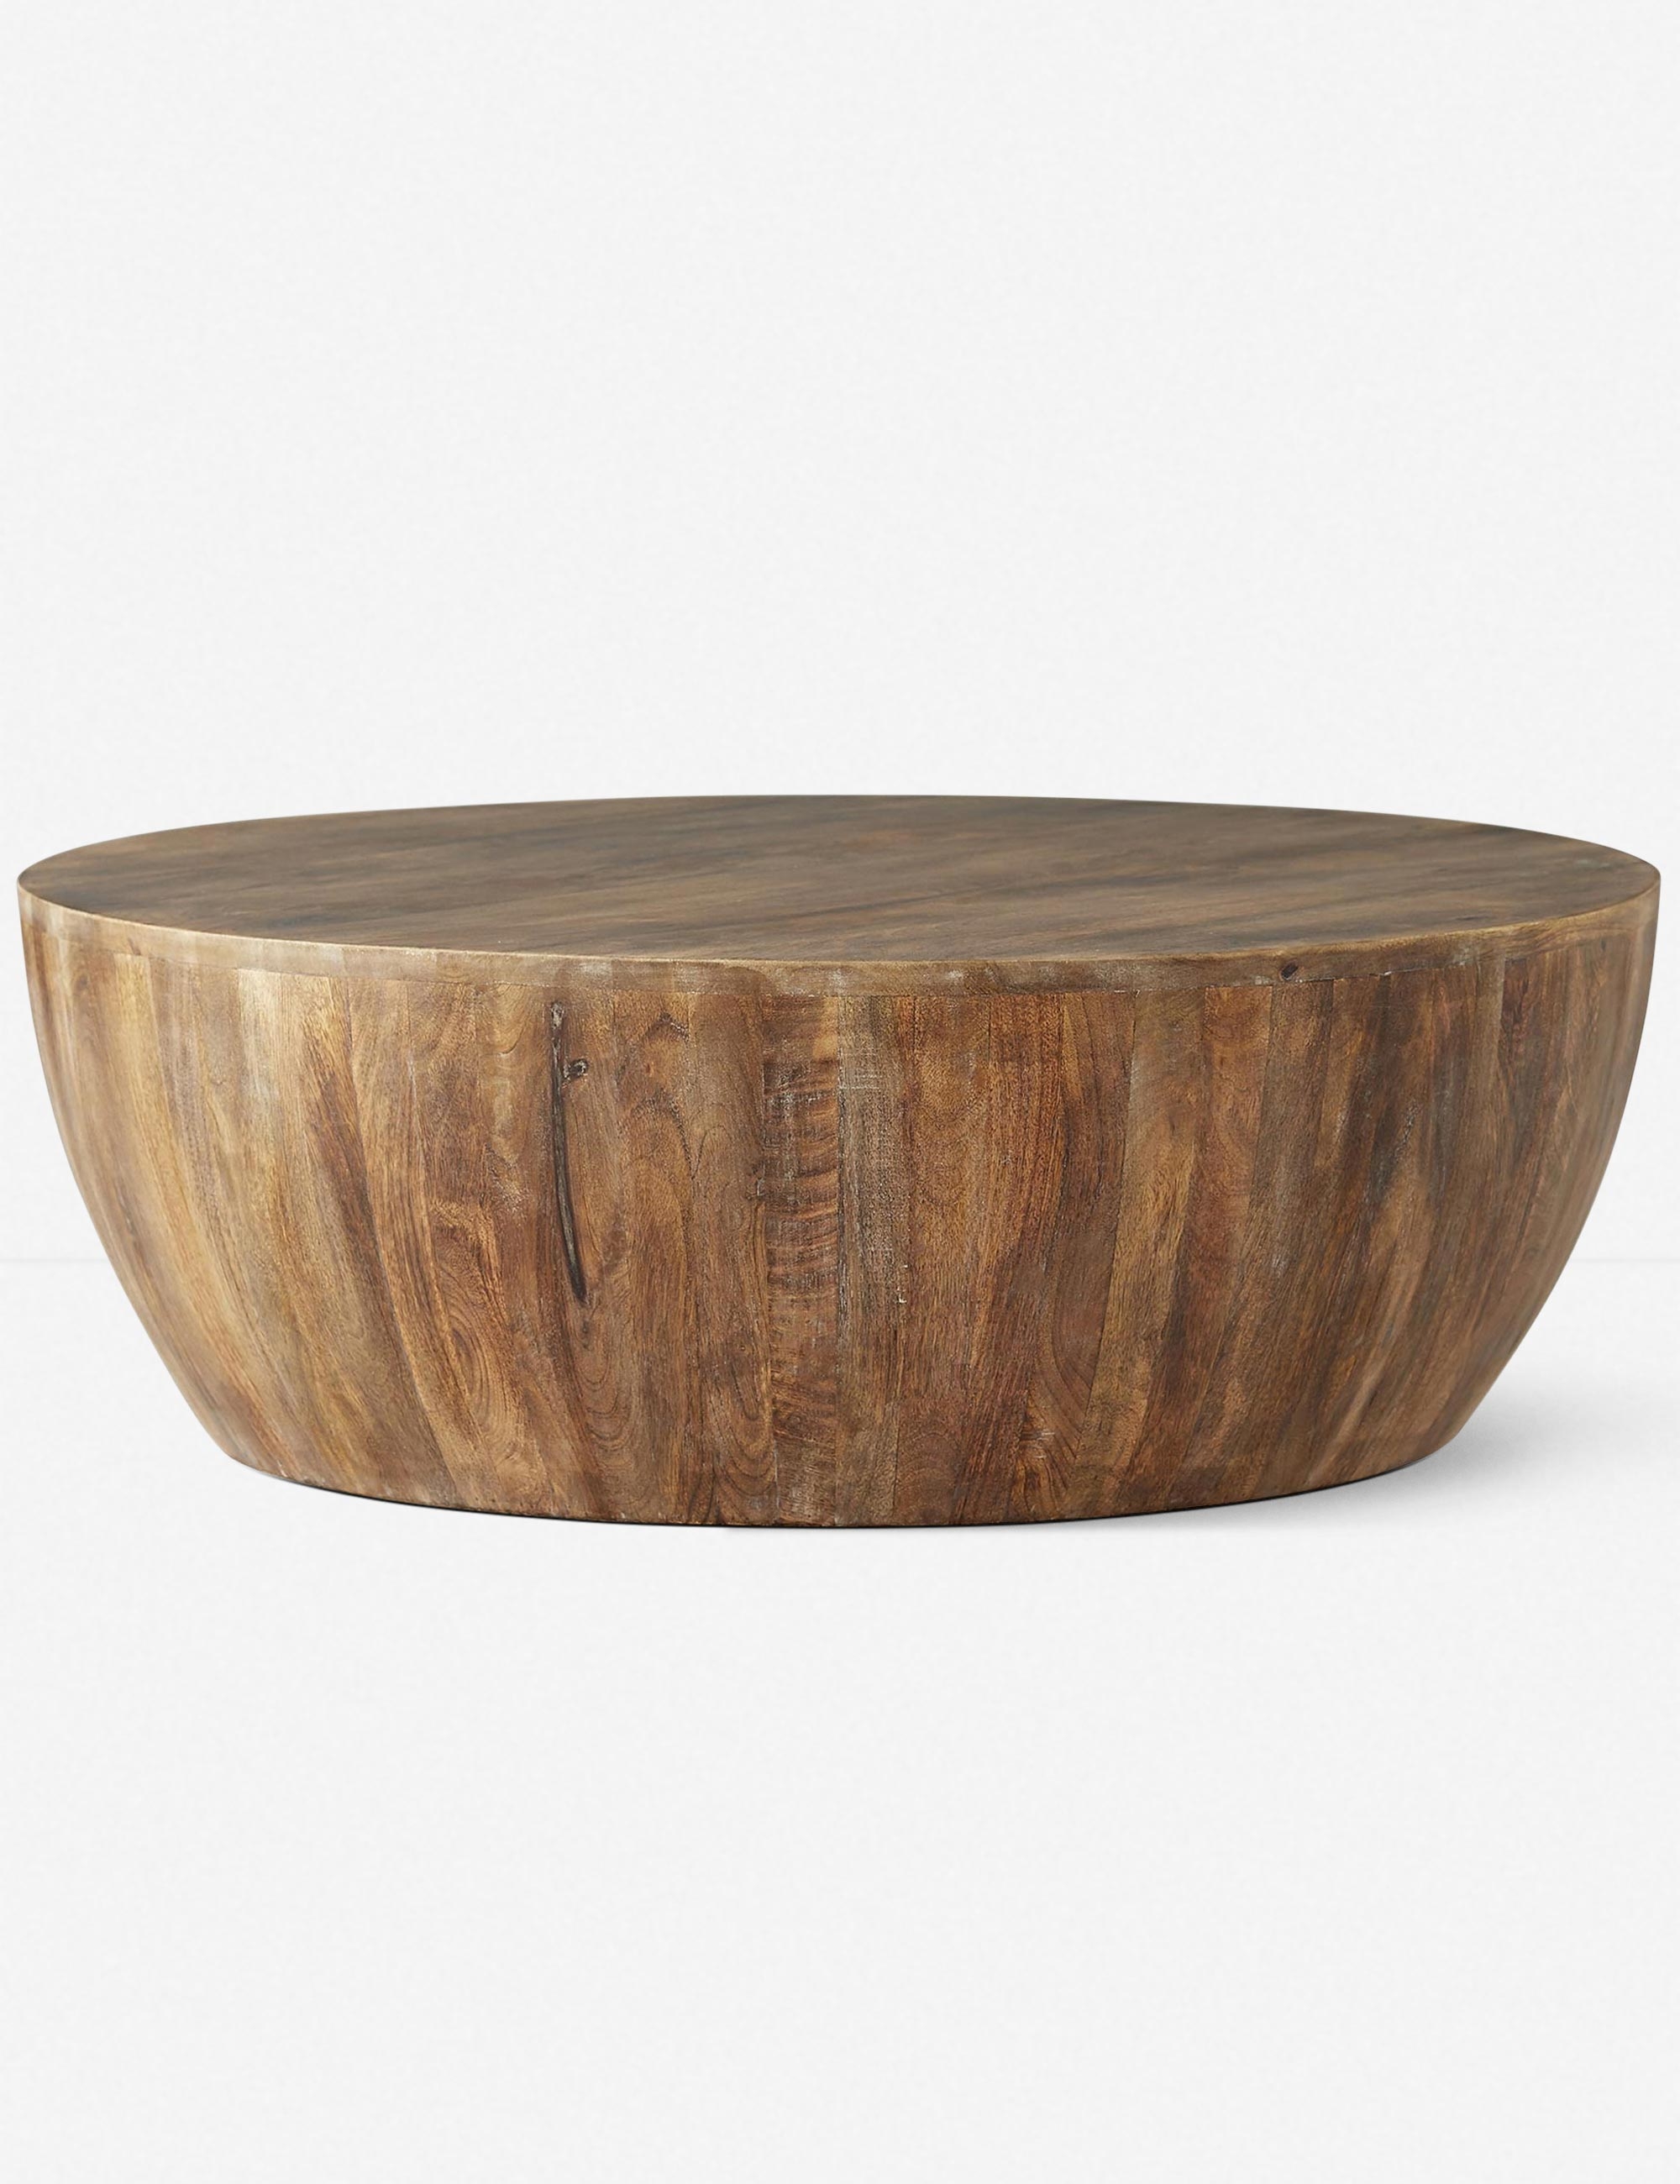 Jacob Round Coffee Table by Arteriors - Image 0